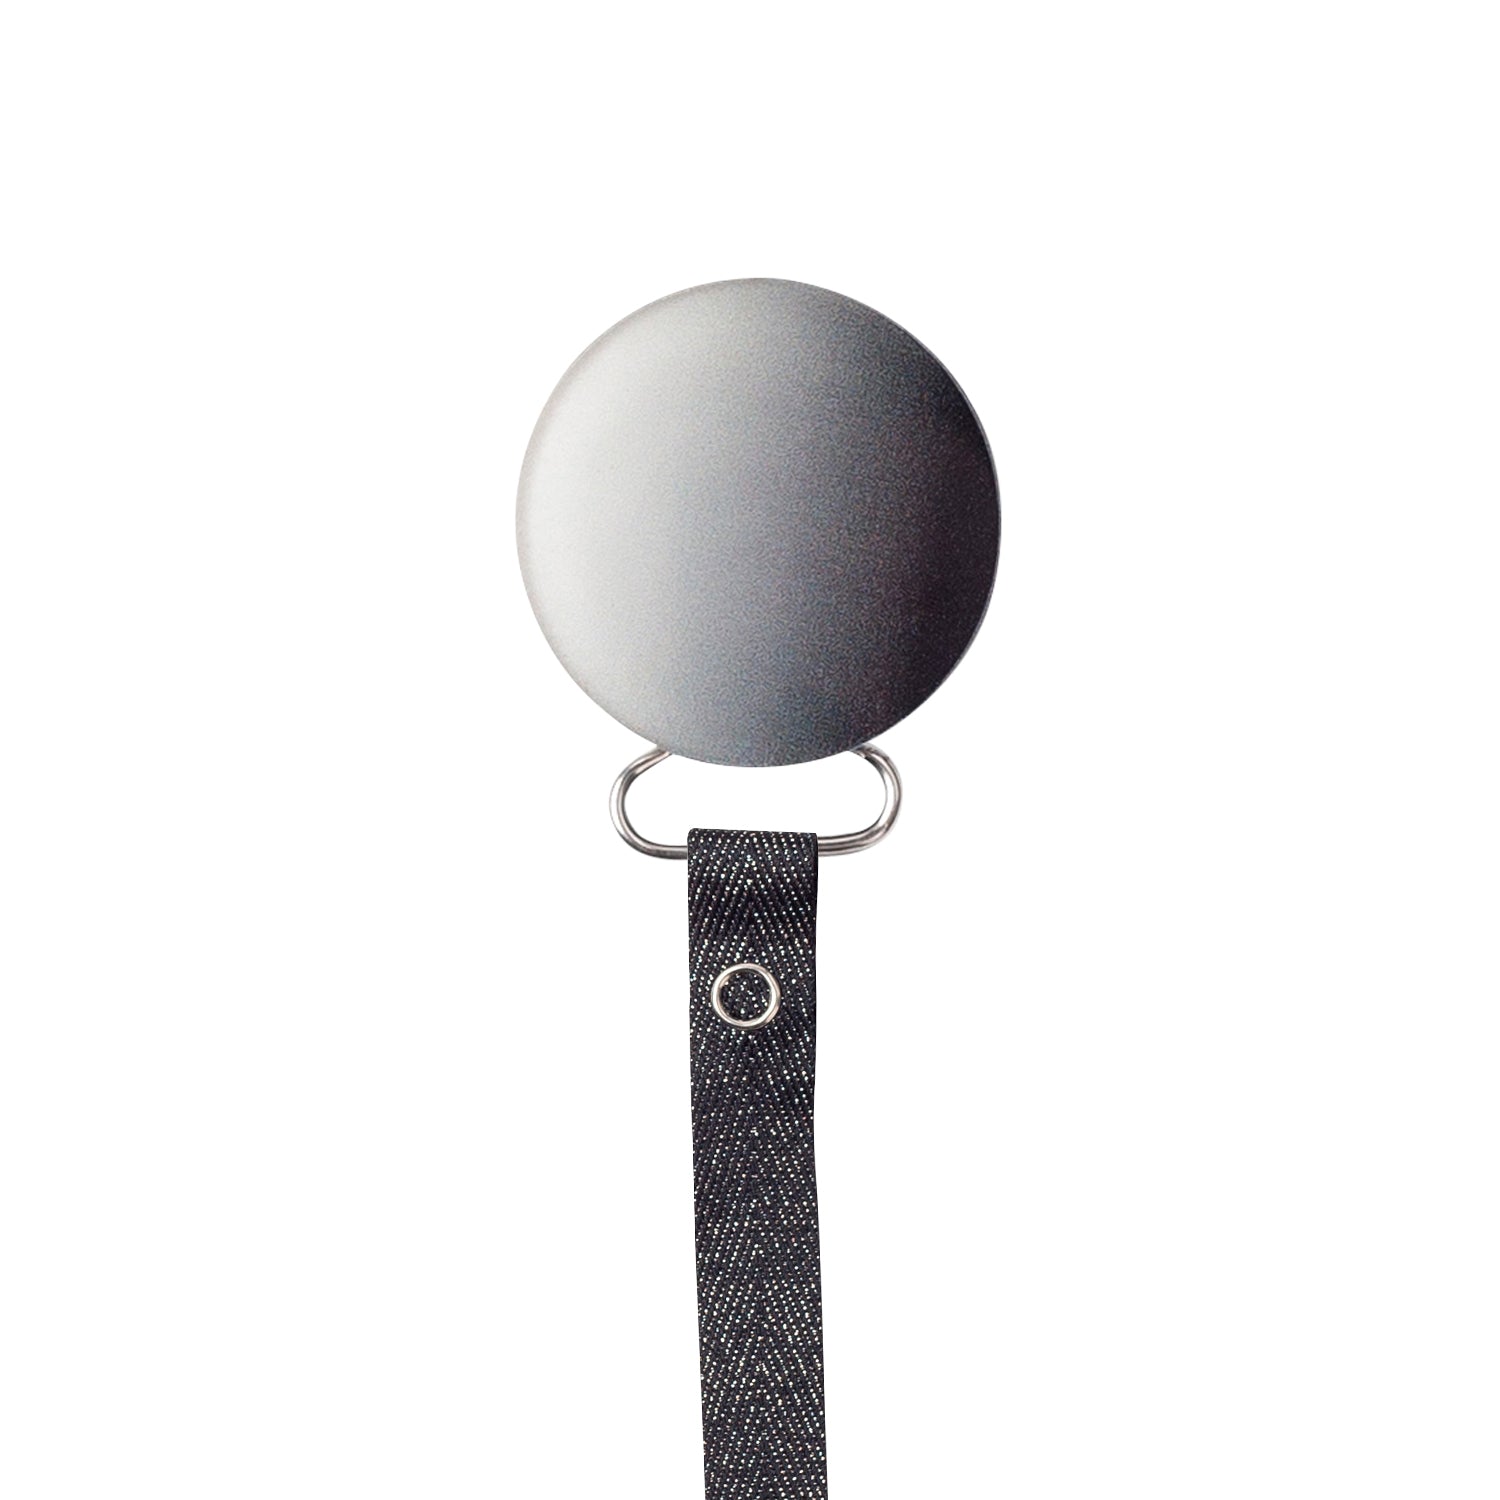 Classy Paci Ombre Black Circle, Black shades, white, grey, baby boy girl pacifier clip